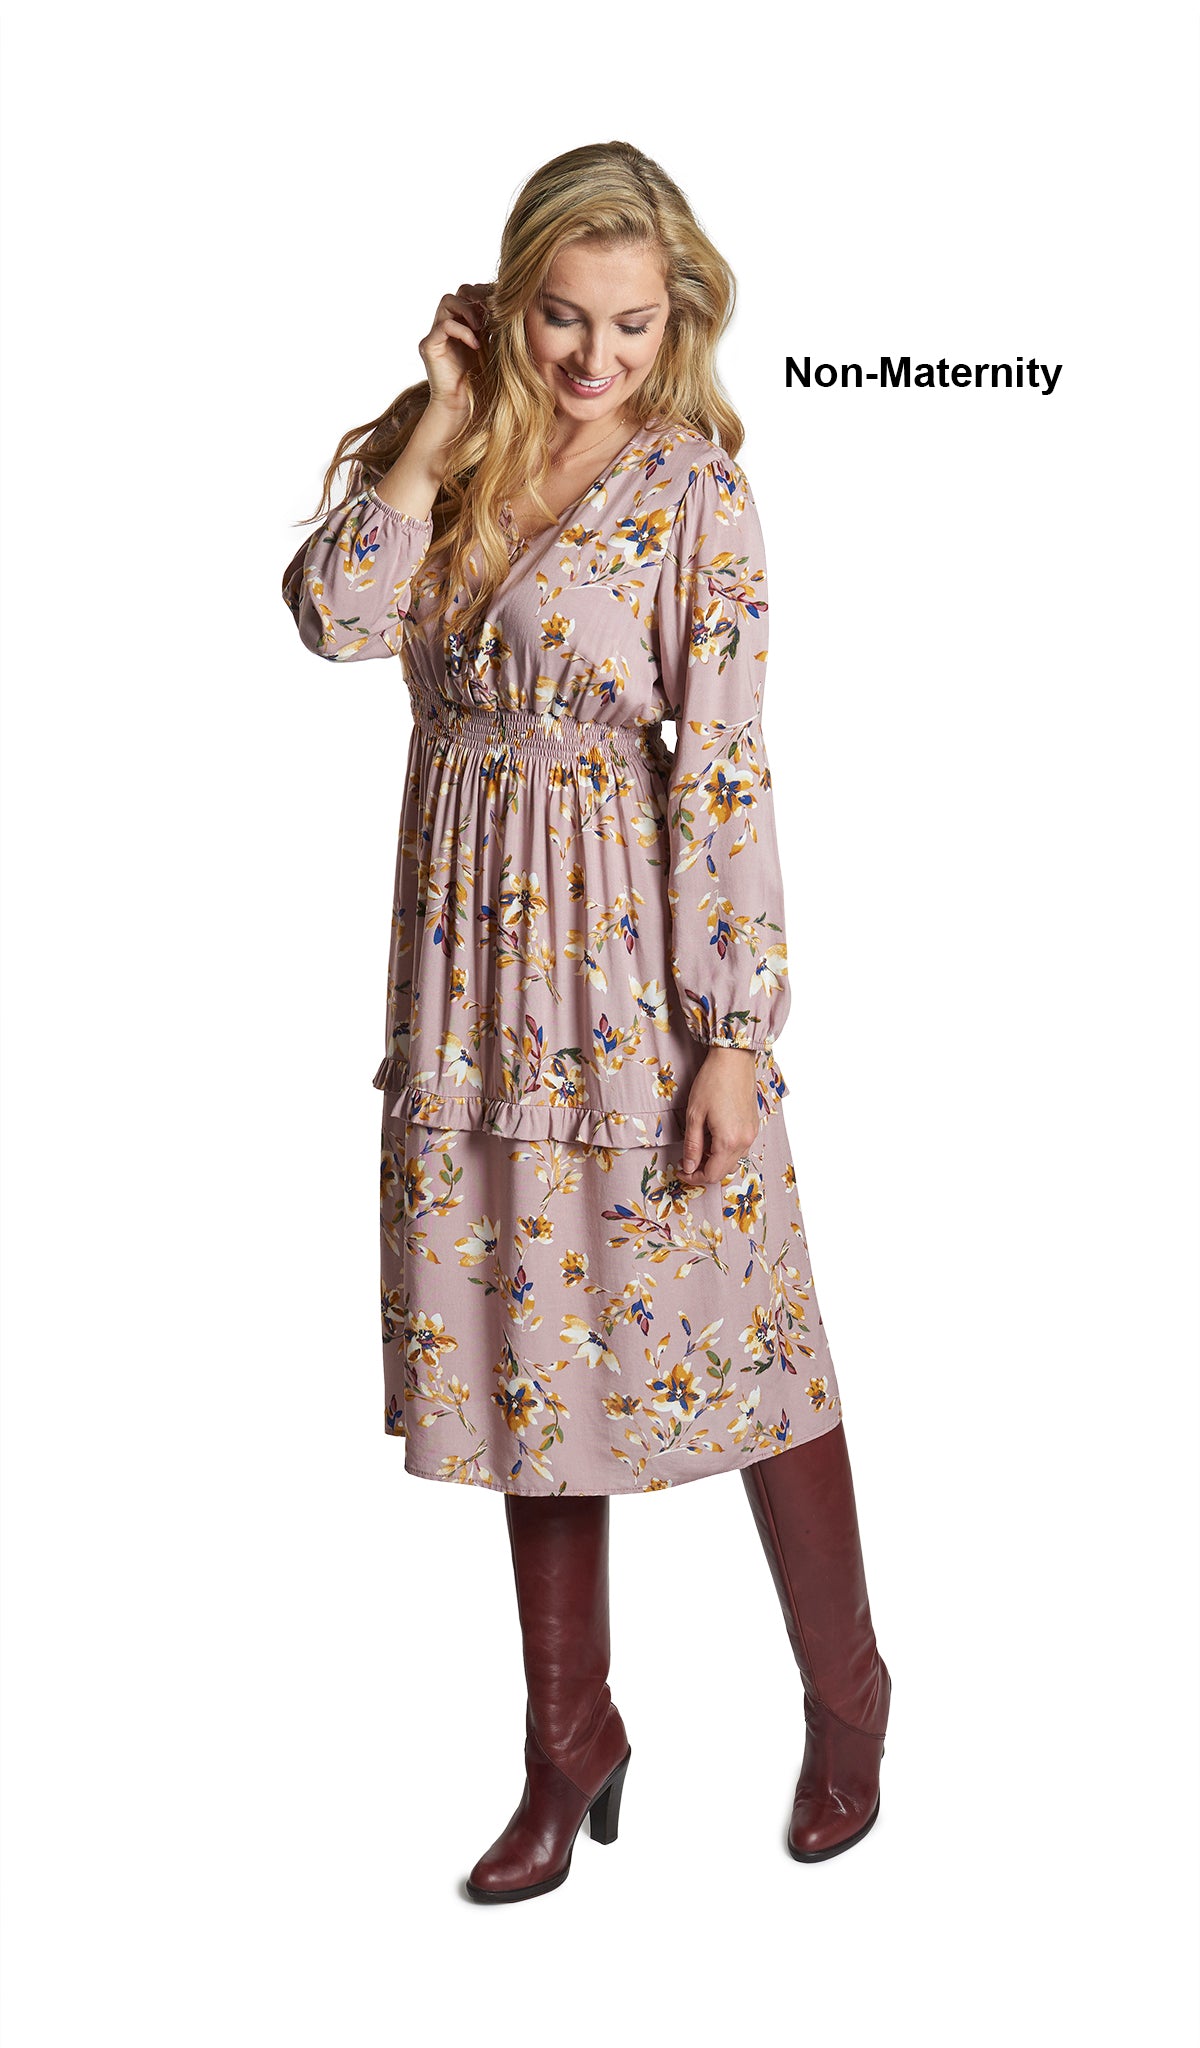 Mauve Floral Jenny Dress. Woman wearing Jenny dress as non-maternity with one hand touching the side of her face.